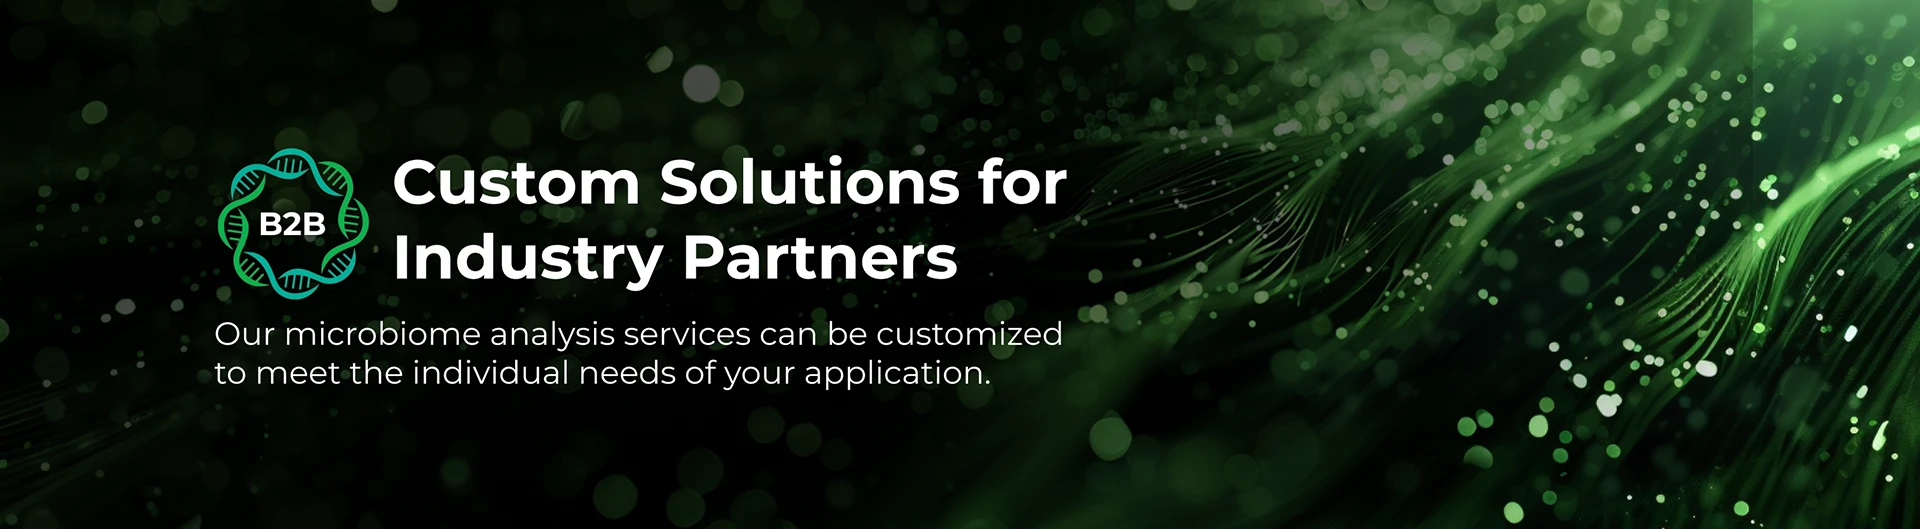 Banner for Microbiome Custom Solutions